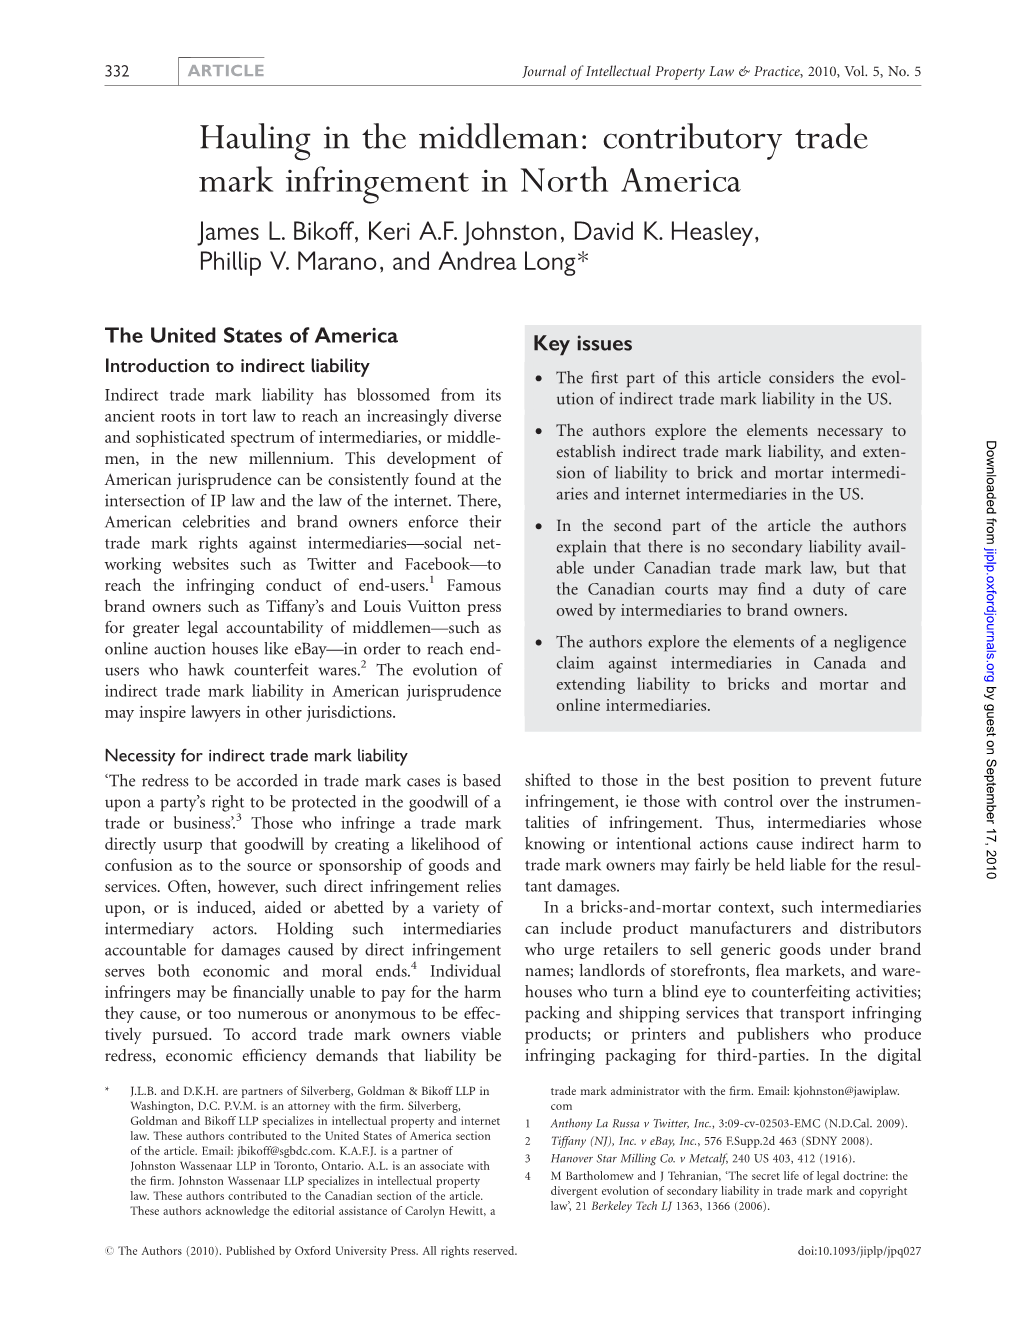 Hauling in the Middleman: Contributory Trade Mark Infringement in North America James L